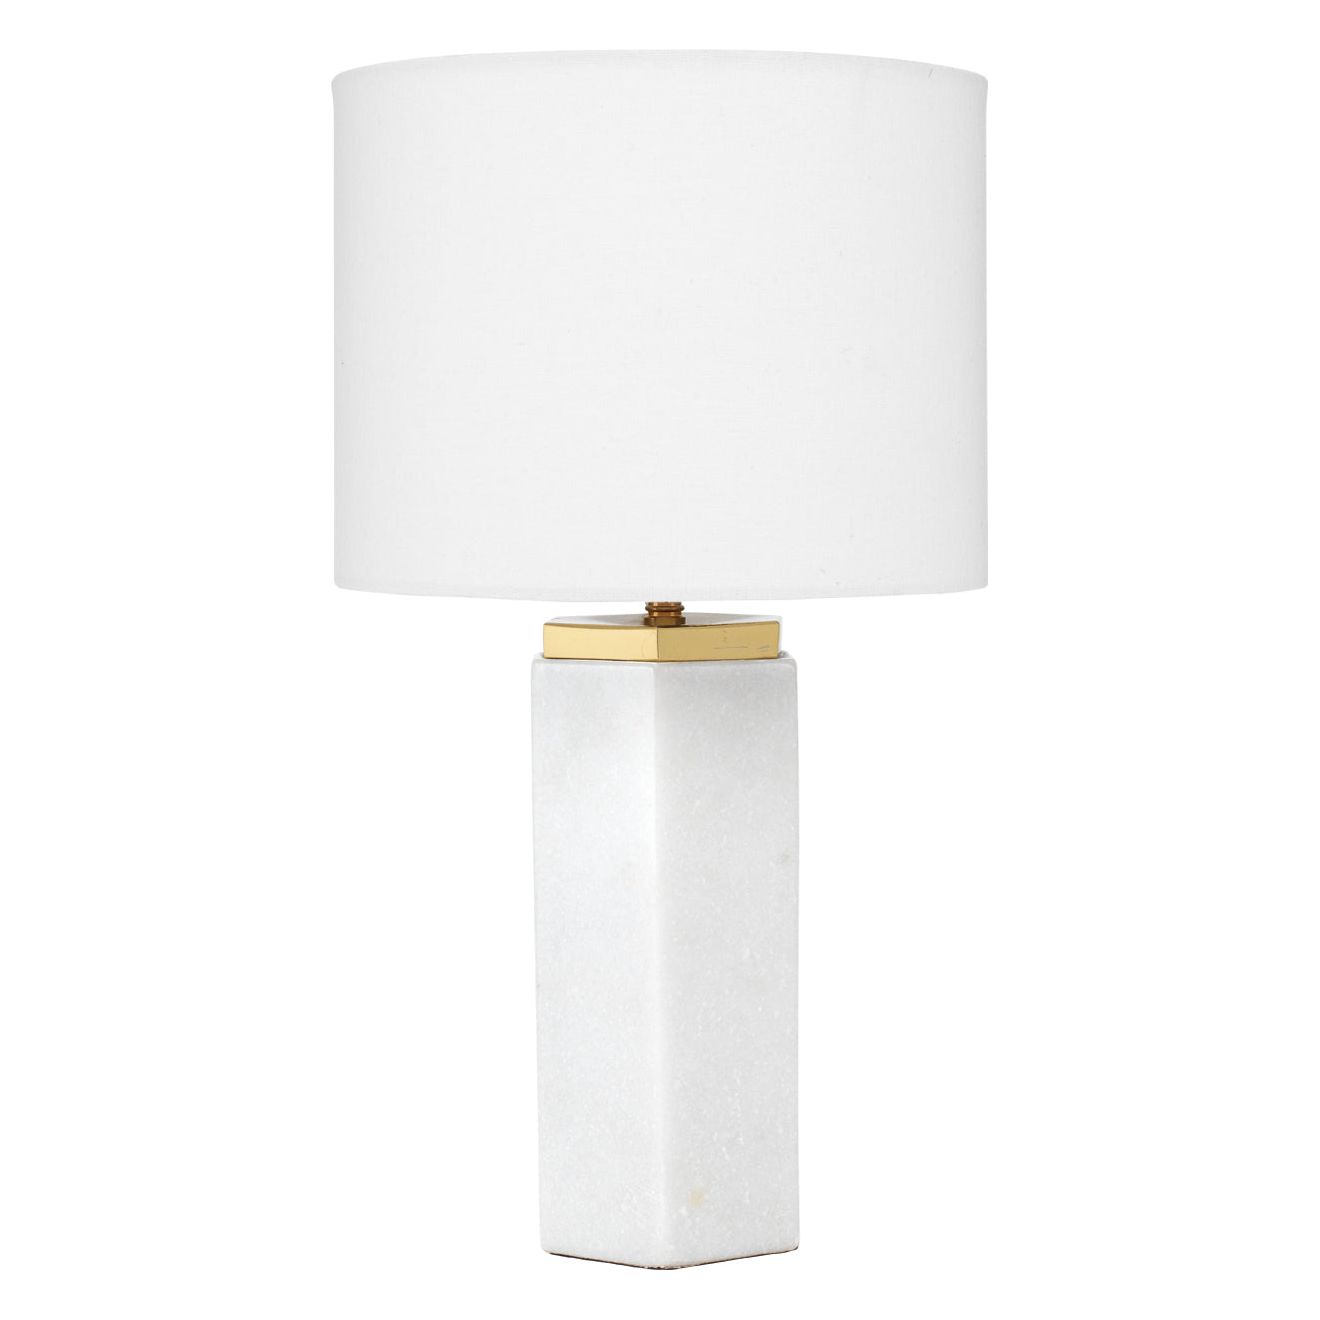 Jamie Young Company - LSLEXIBRWH - Lexi Table Lamp - Lexi - White